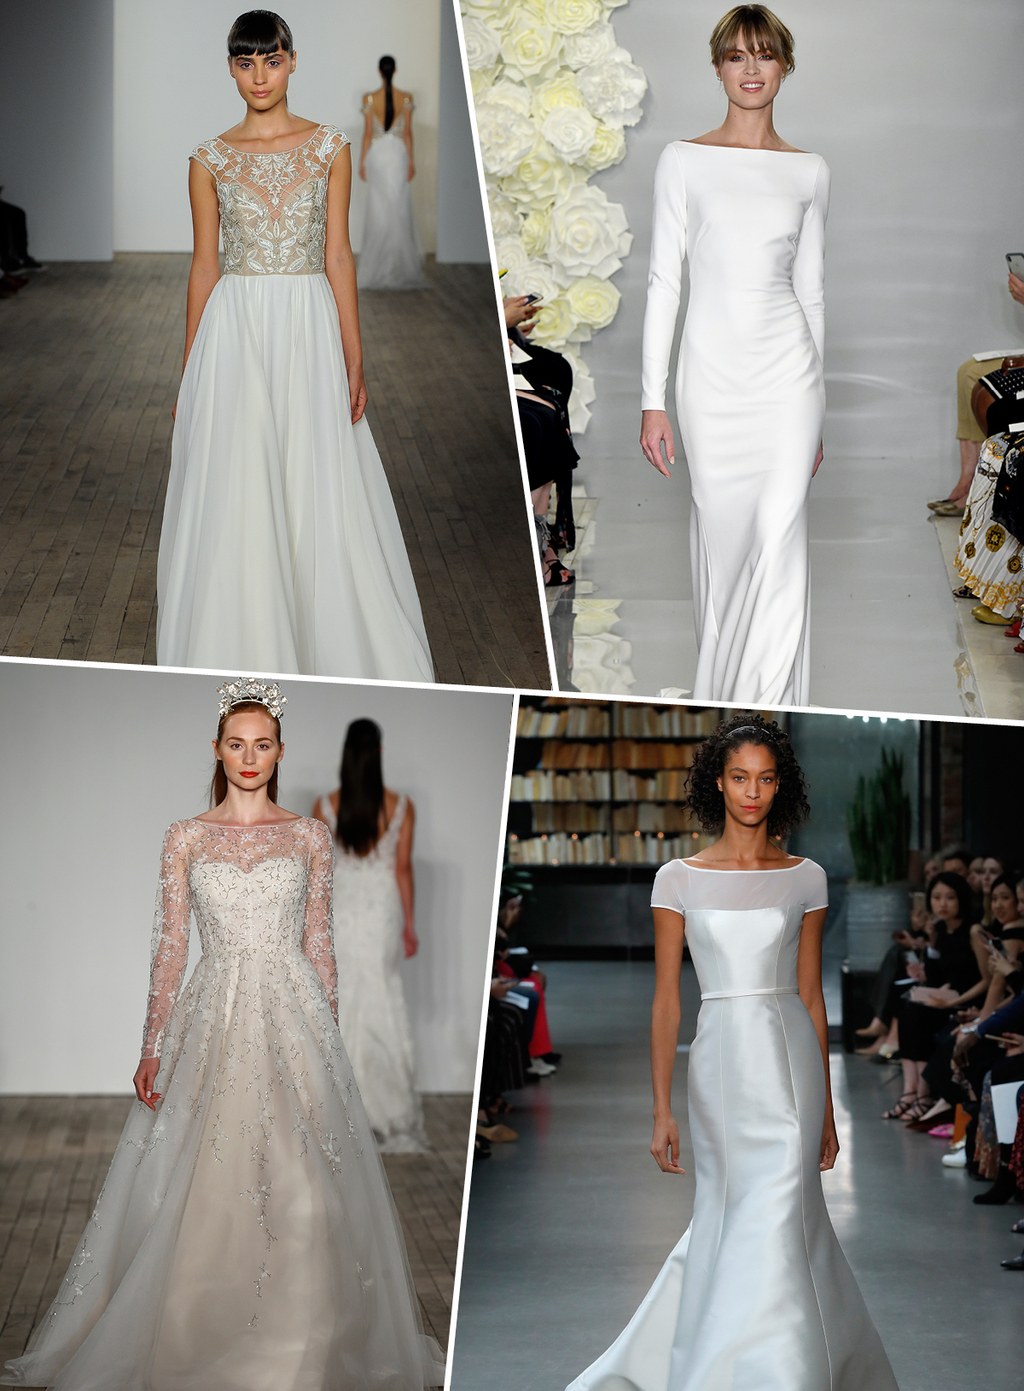 The Five Wedding Gown Trends On The Radar In 2019 | Bridal Secrets